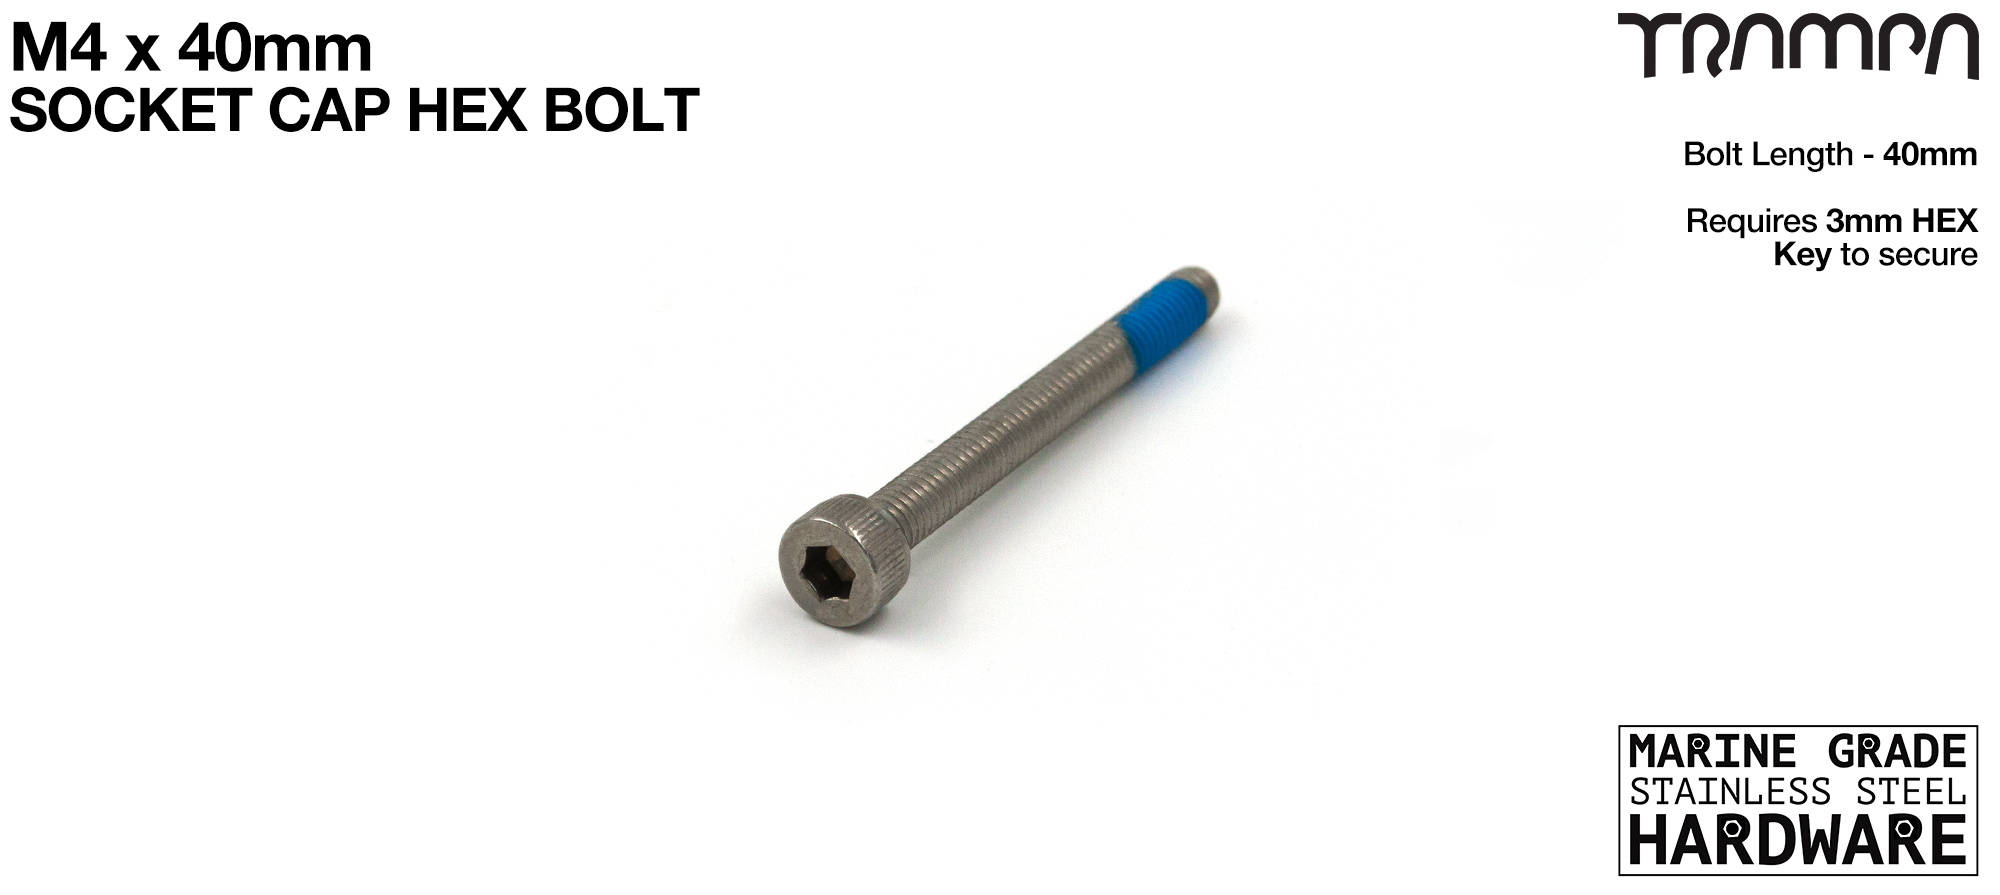 M4 x 40mm Socket Capped Allen-Key Bolt - Marine Grade Stainless steel with locking paste